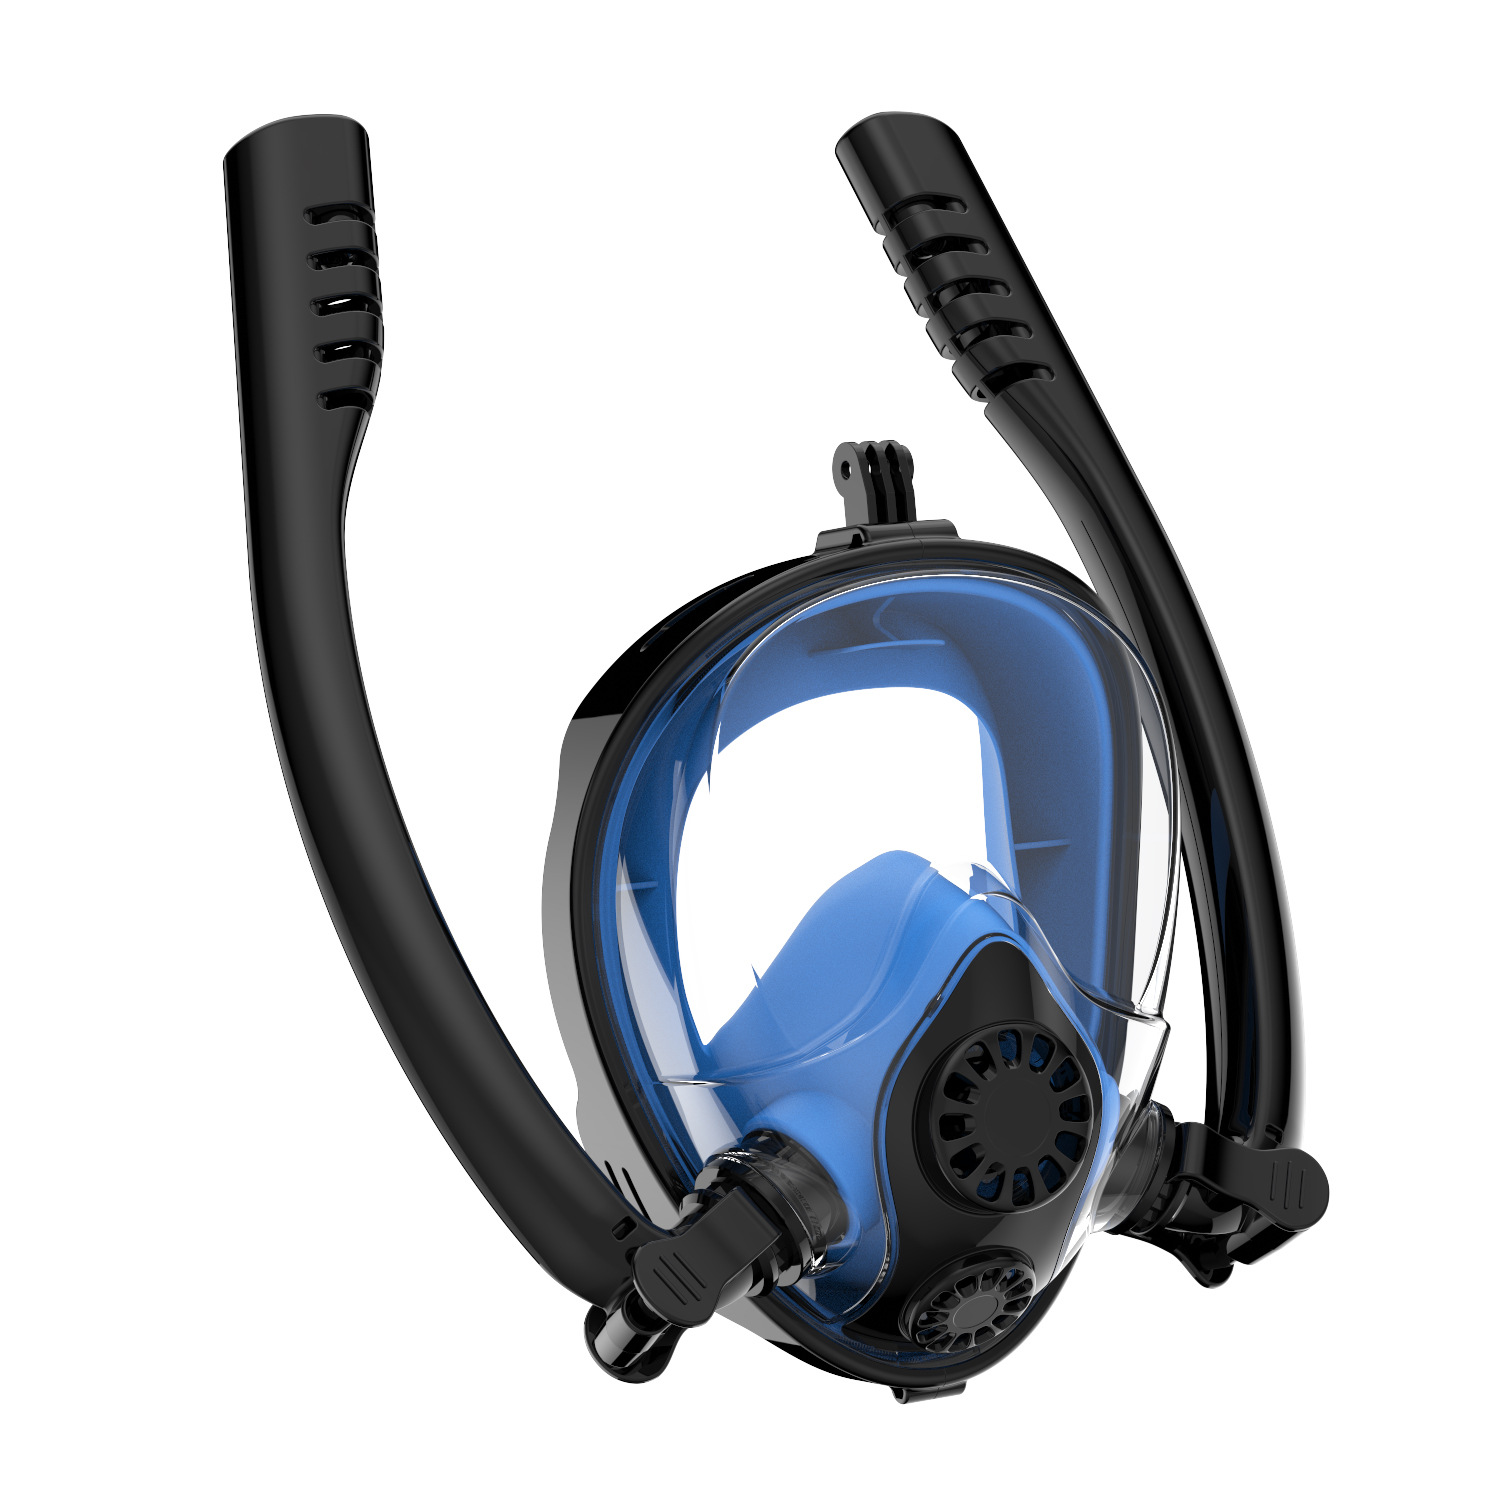 2019 Amazon Hot Upgraded Full Face Snorkel Mask, Silicone Anti-Fogging Scuba Diving Mask with Double Tube